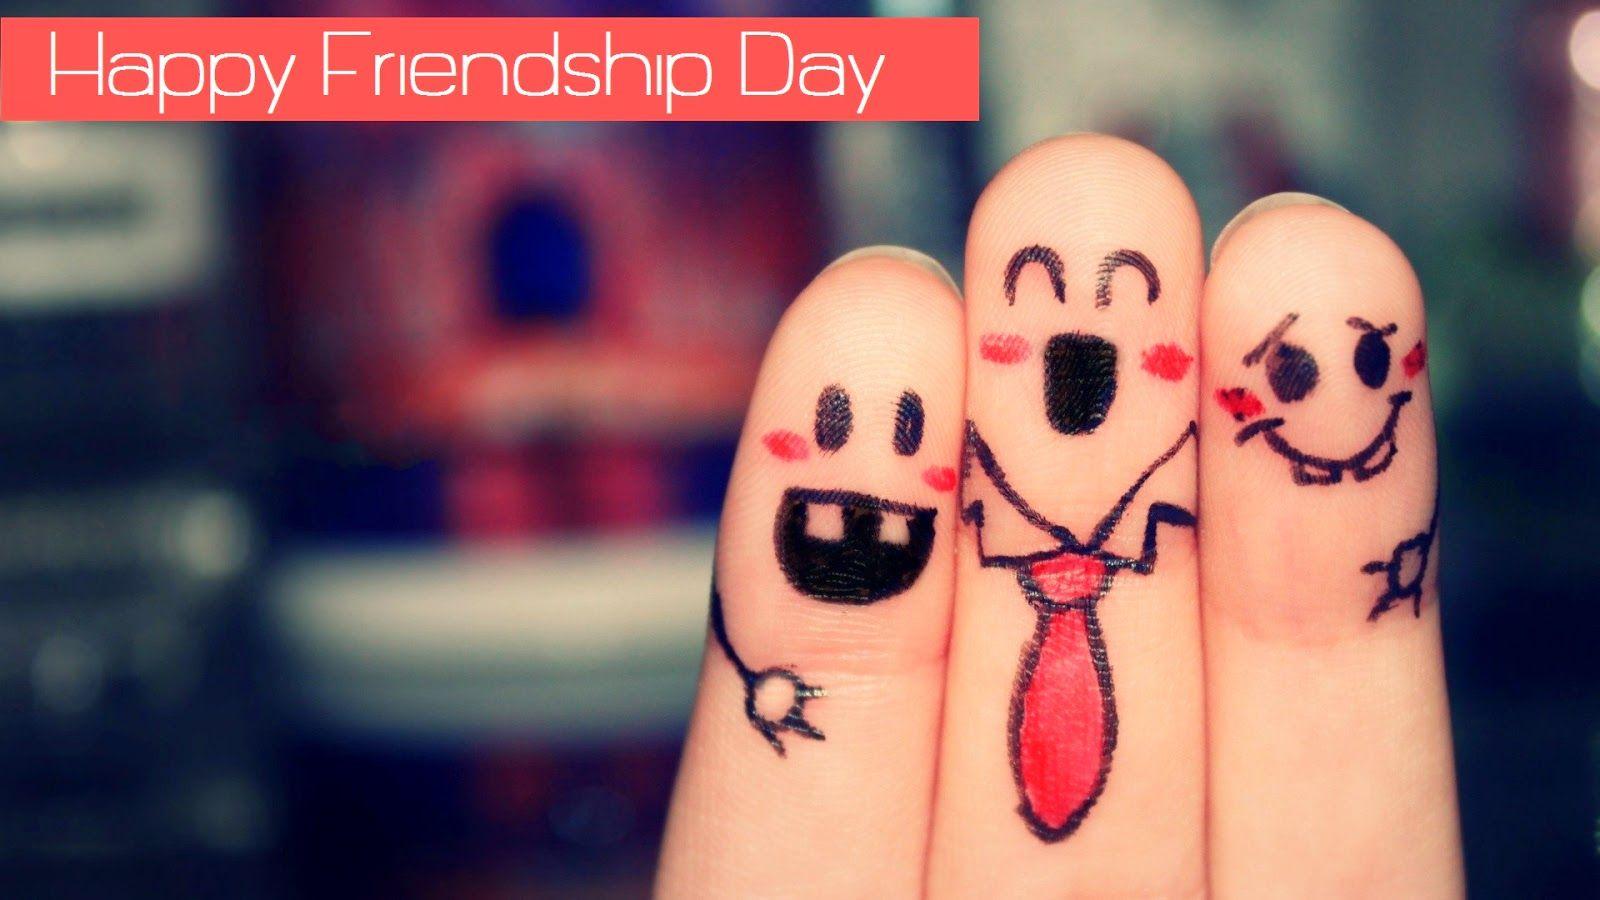 Special Happy Friendship Day 2018 Wishes HD Wallpaper Whatsapp